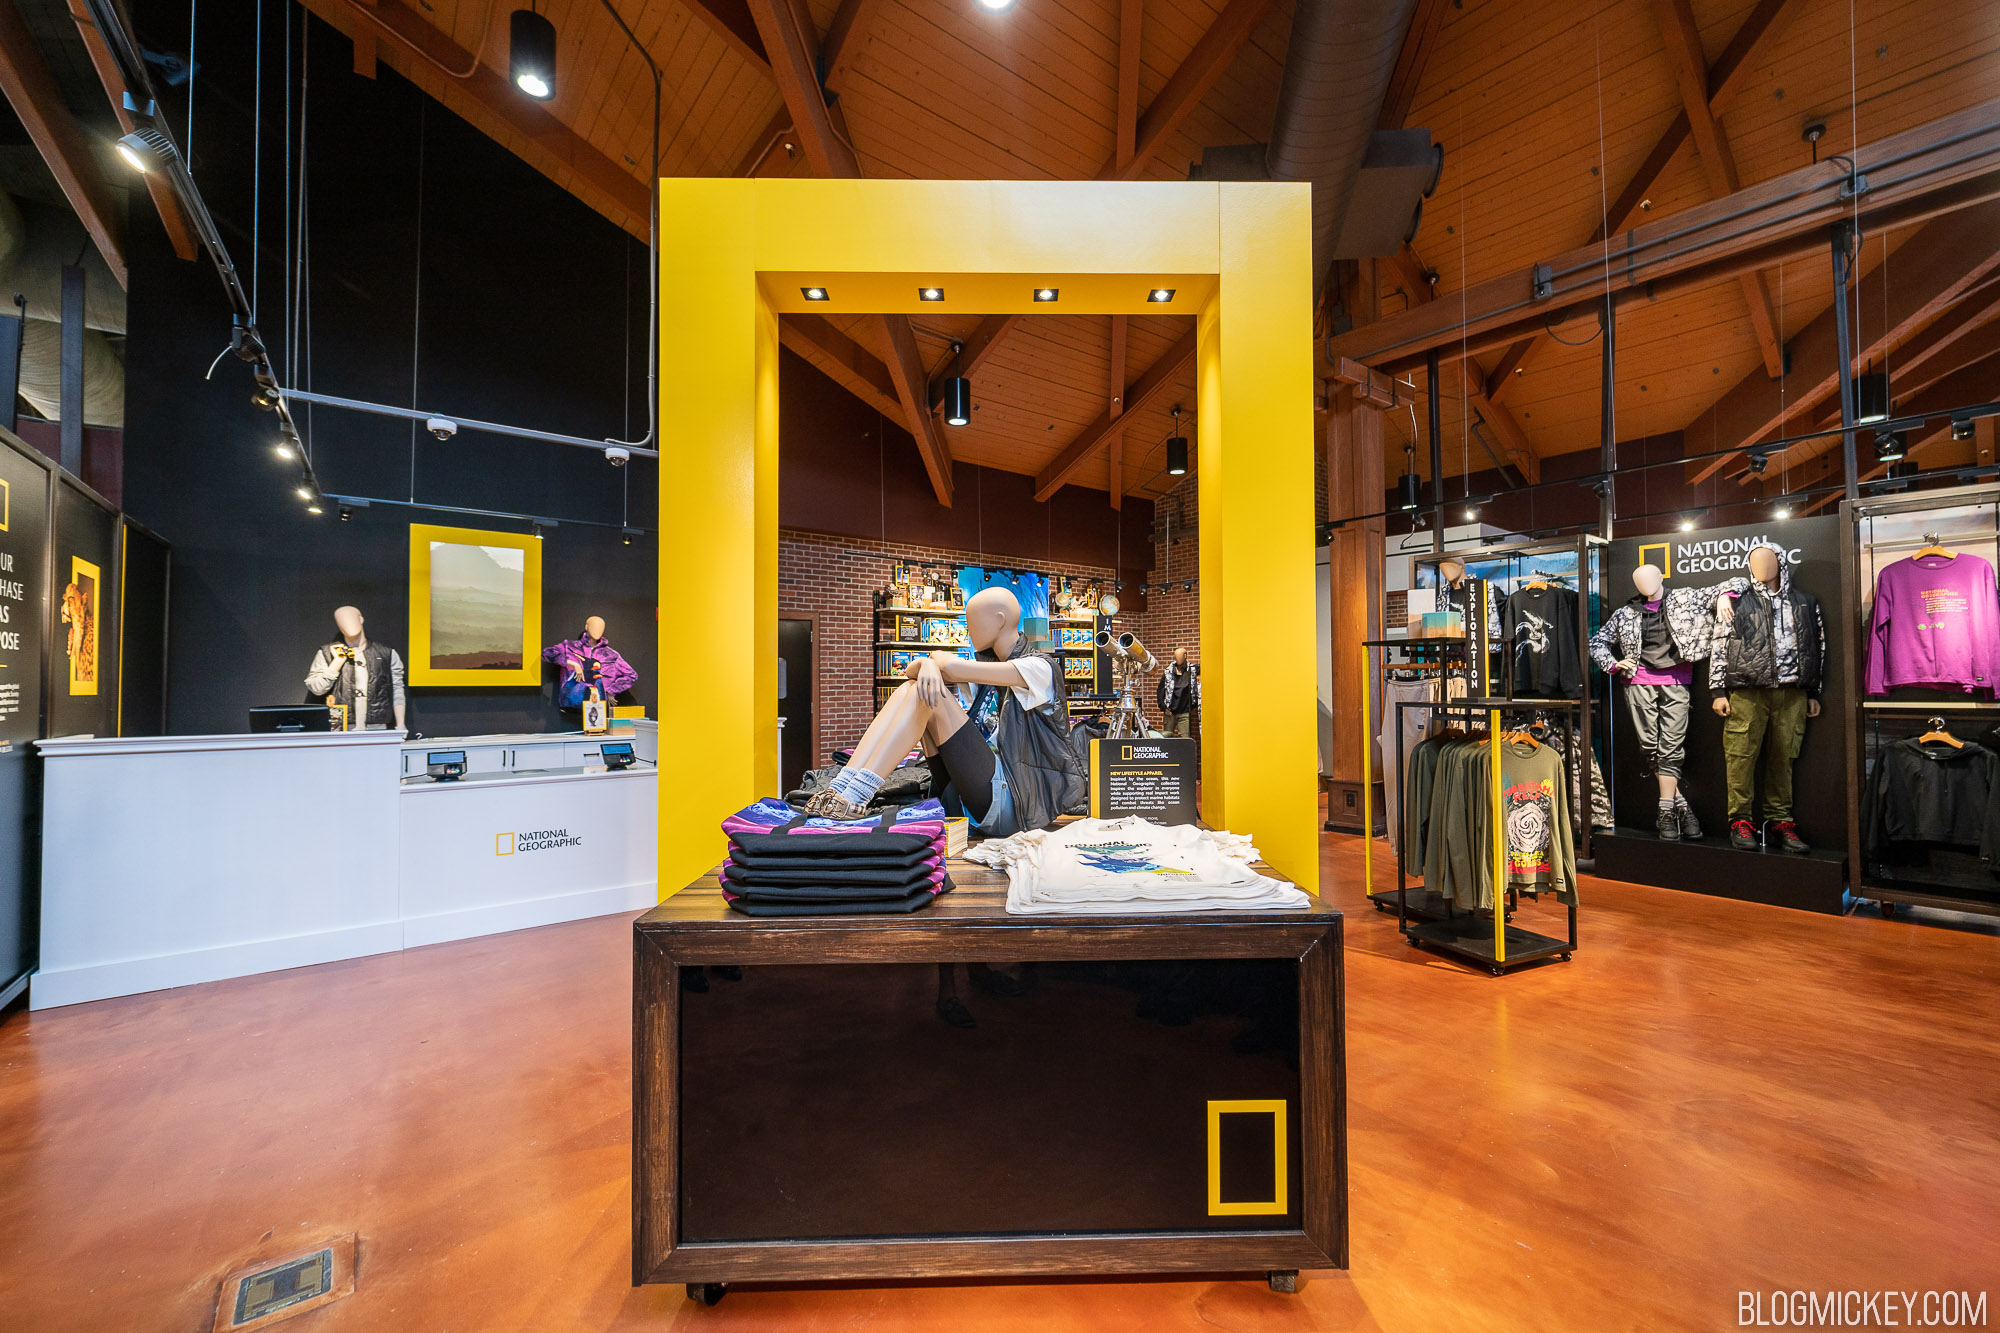 National Geographic Marvel Stores Replace The Dress Shop Wonderground Gallery At Marketplace Co Op In Disney Springs